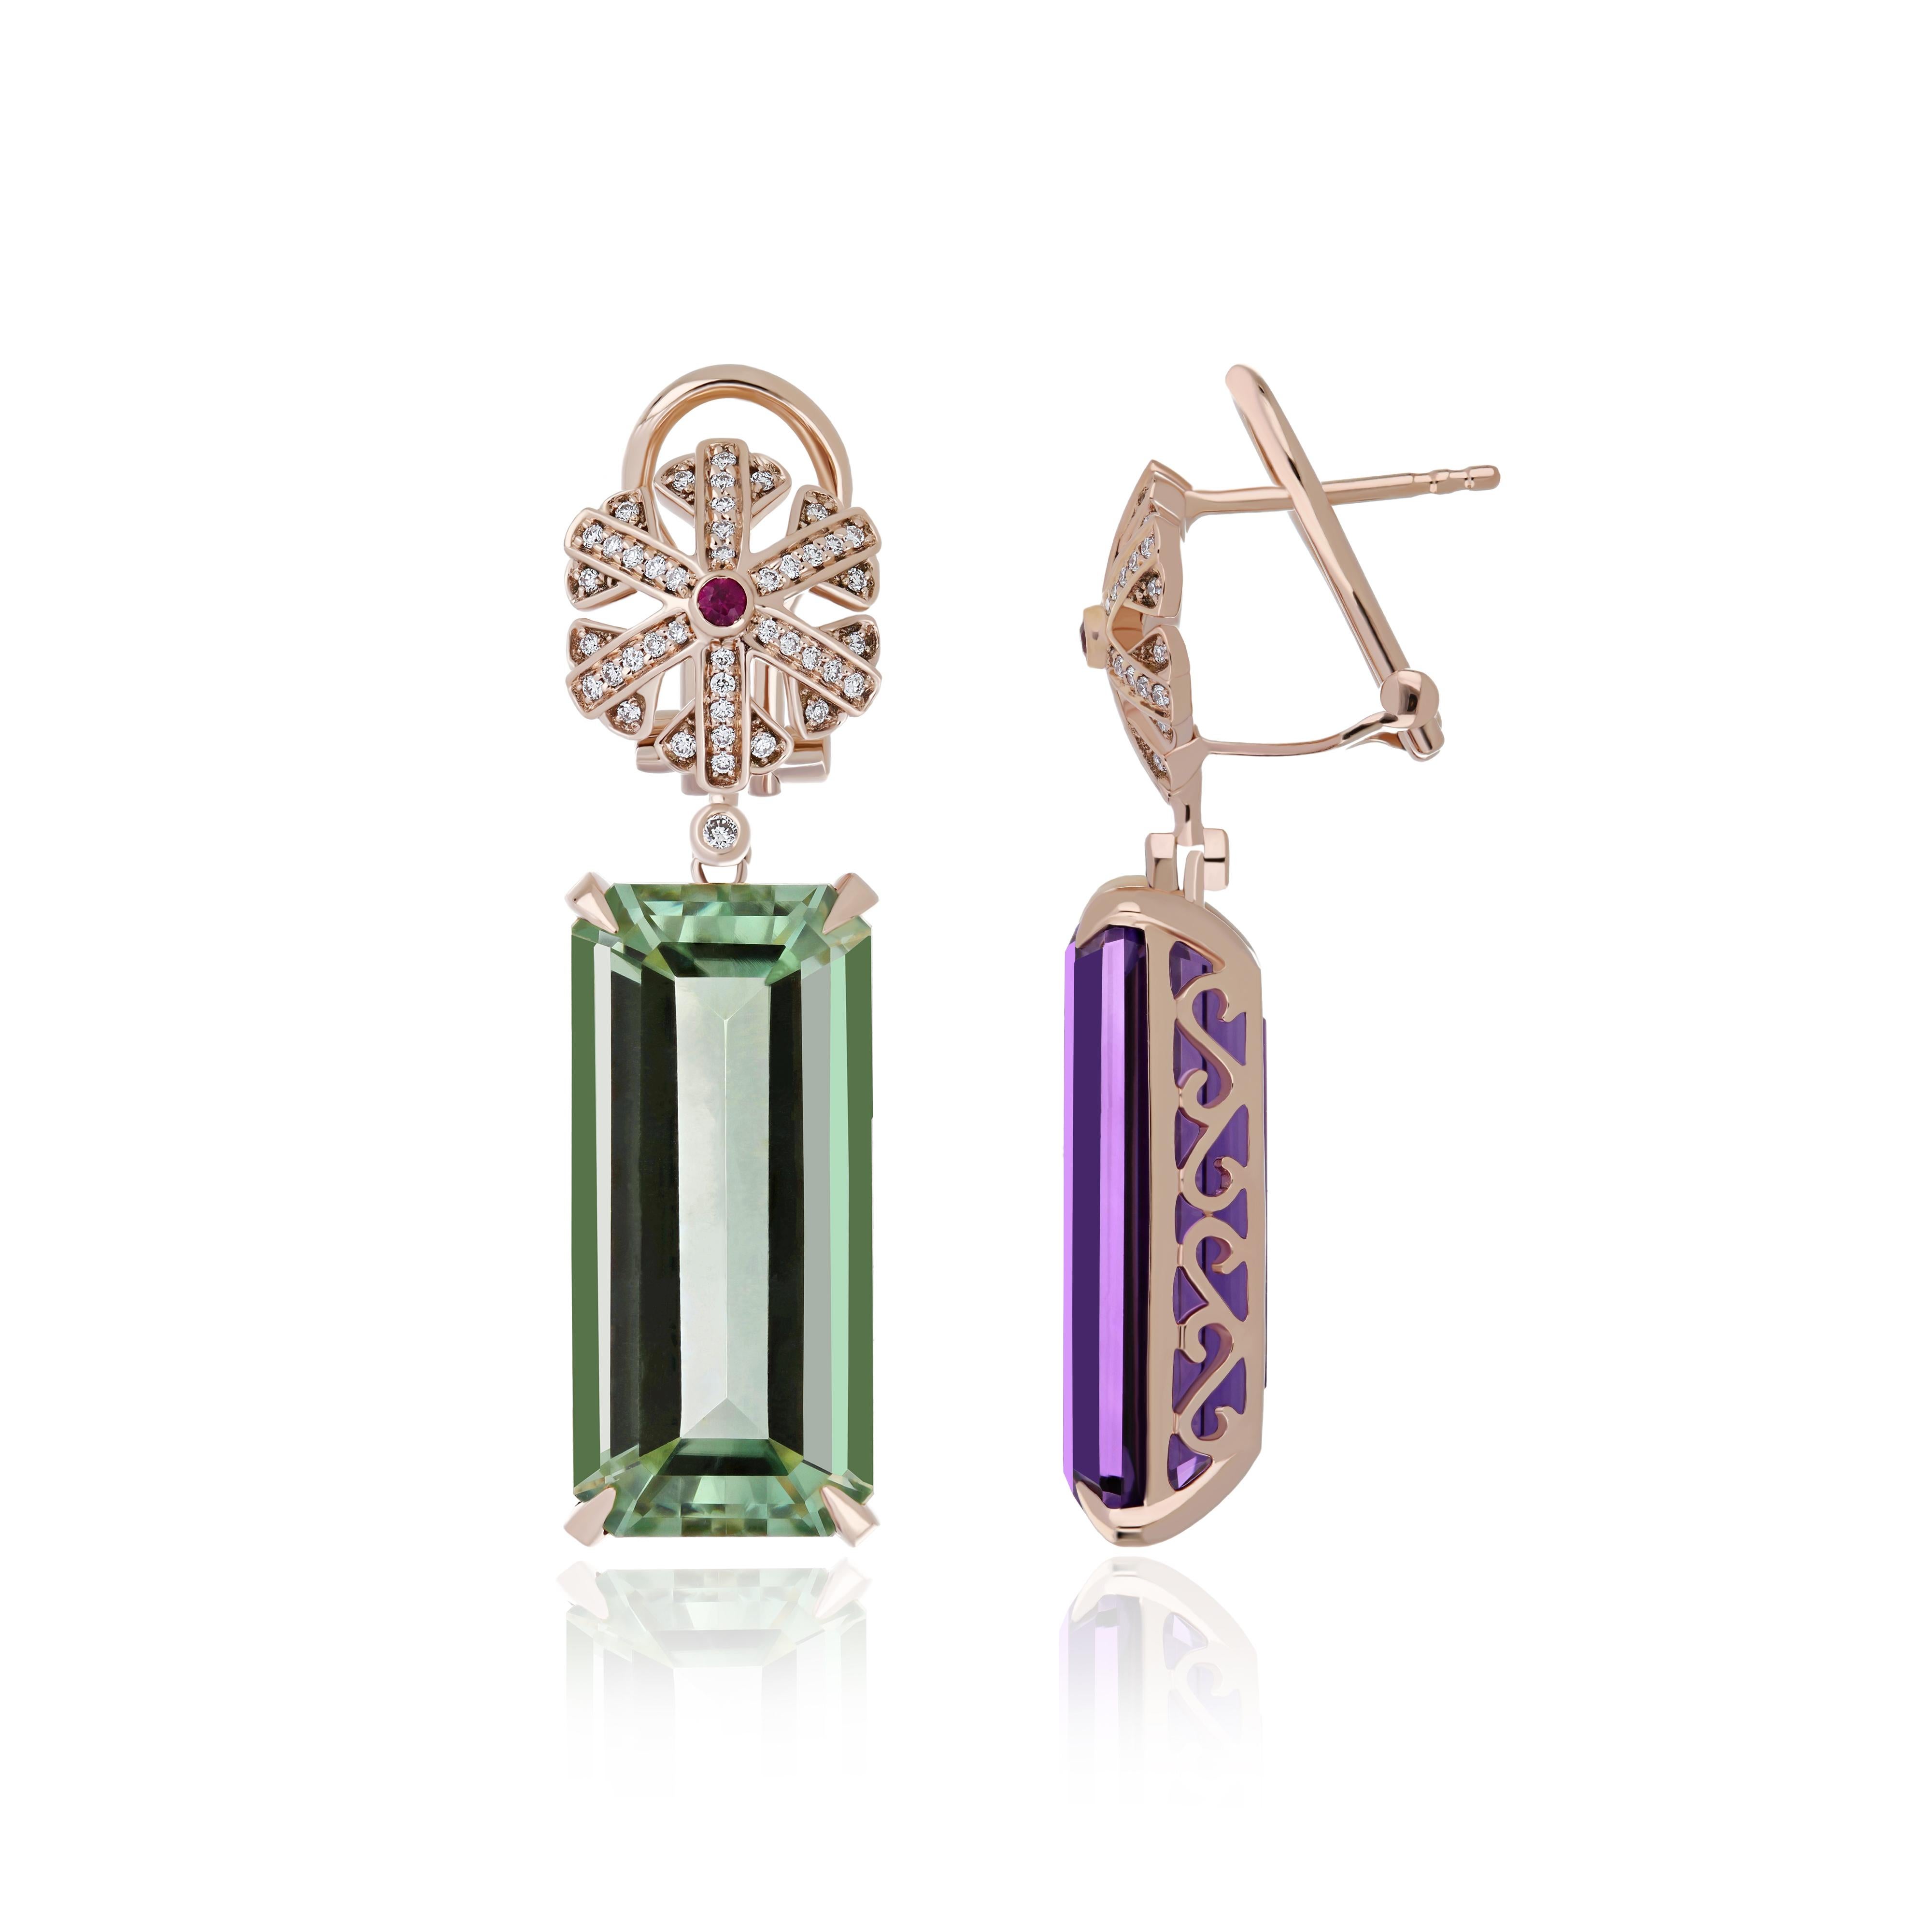 Elegant and Exquisitely Detailed Mismatched pair of  14Karat Rose Gold Earring set with Octagon Cut Mint Quartz weighing approx.12.05Cts & Octagon Cut Amethyst weighing approx. 11.21Cts, Accented with contrasting Ruby, weighing approx., 0.05Cts and